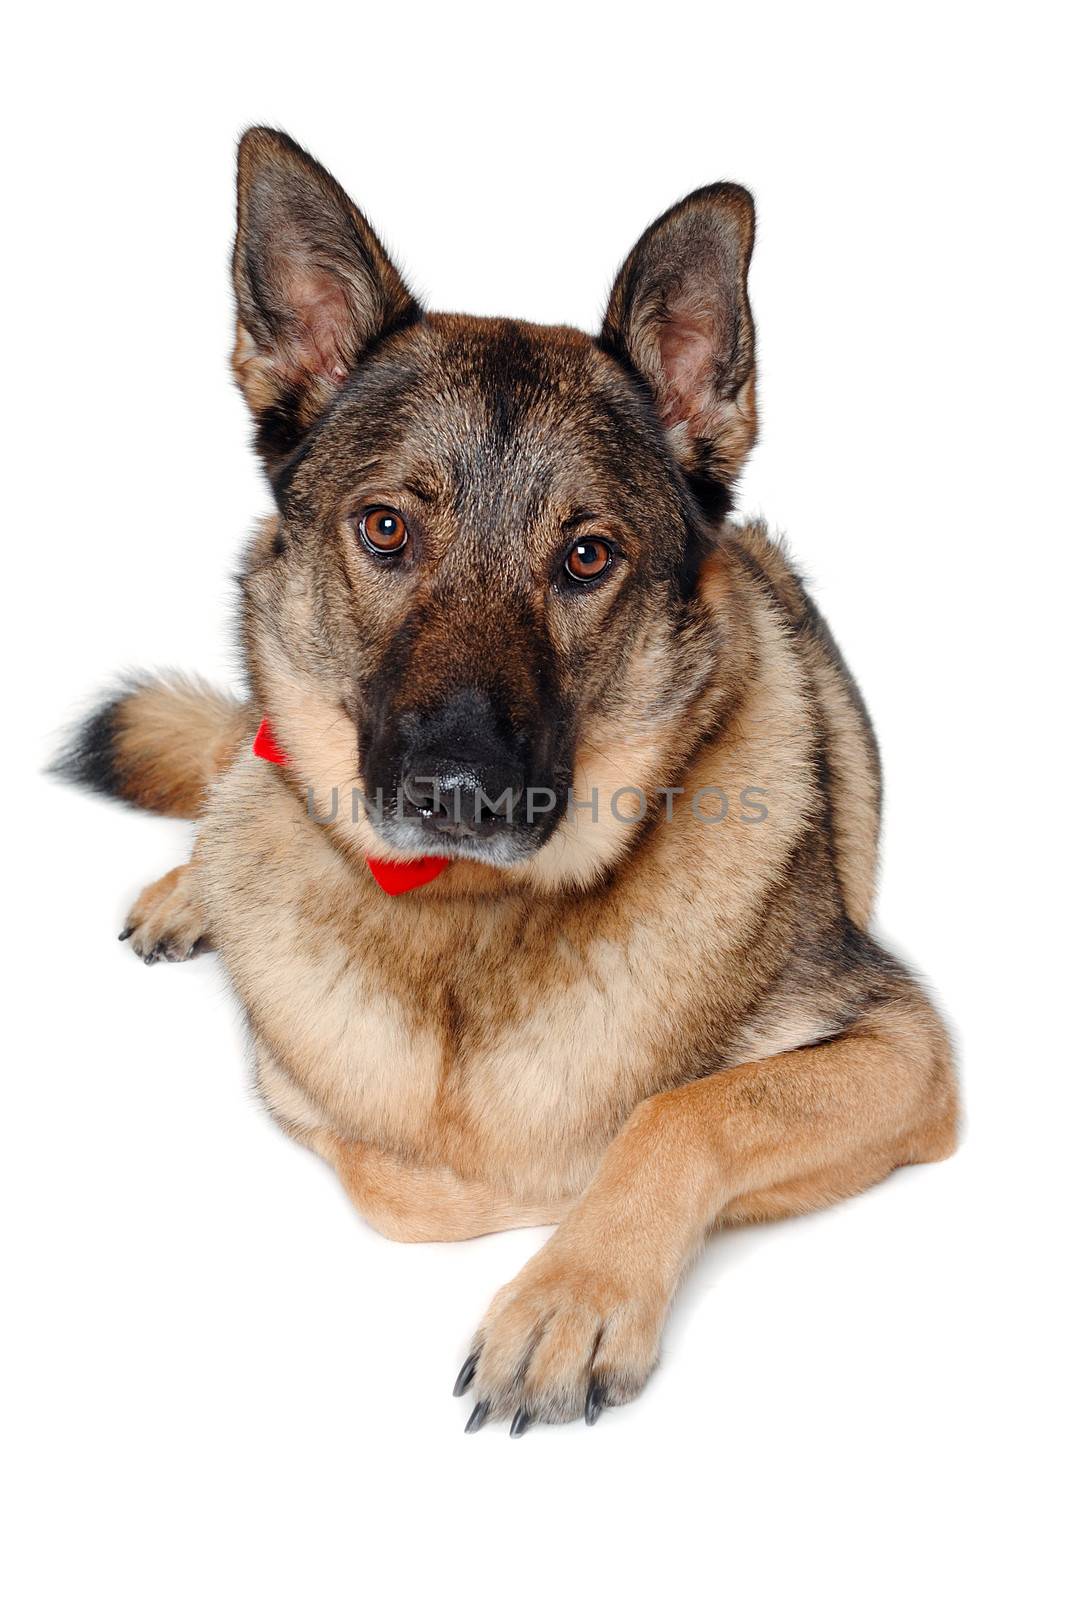 German shepherd dog is resting on a white background